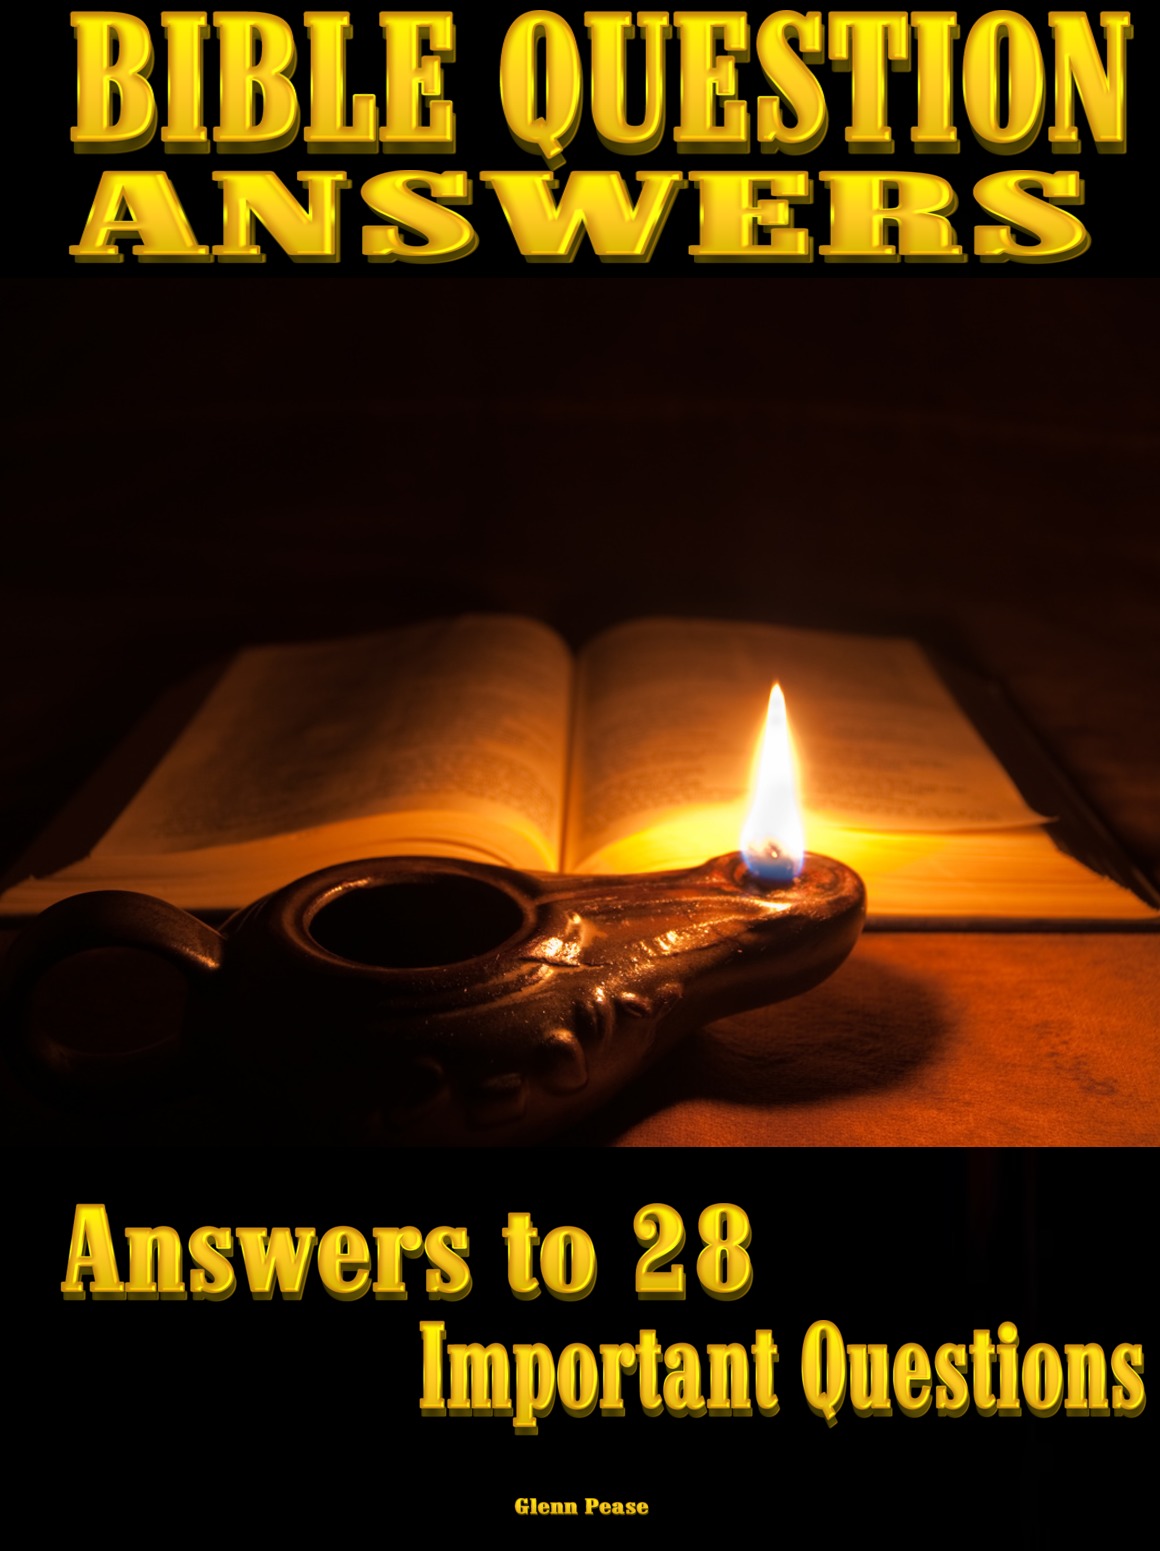 BIBLE QUESTIONS ANSWERED